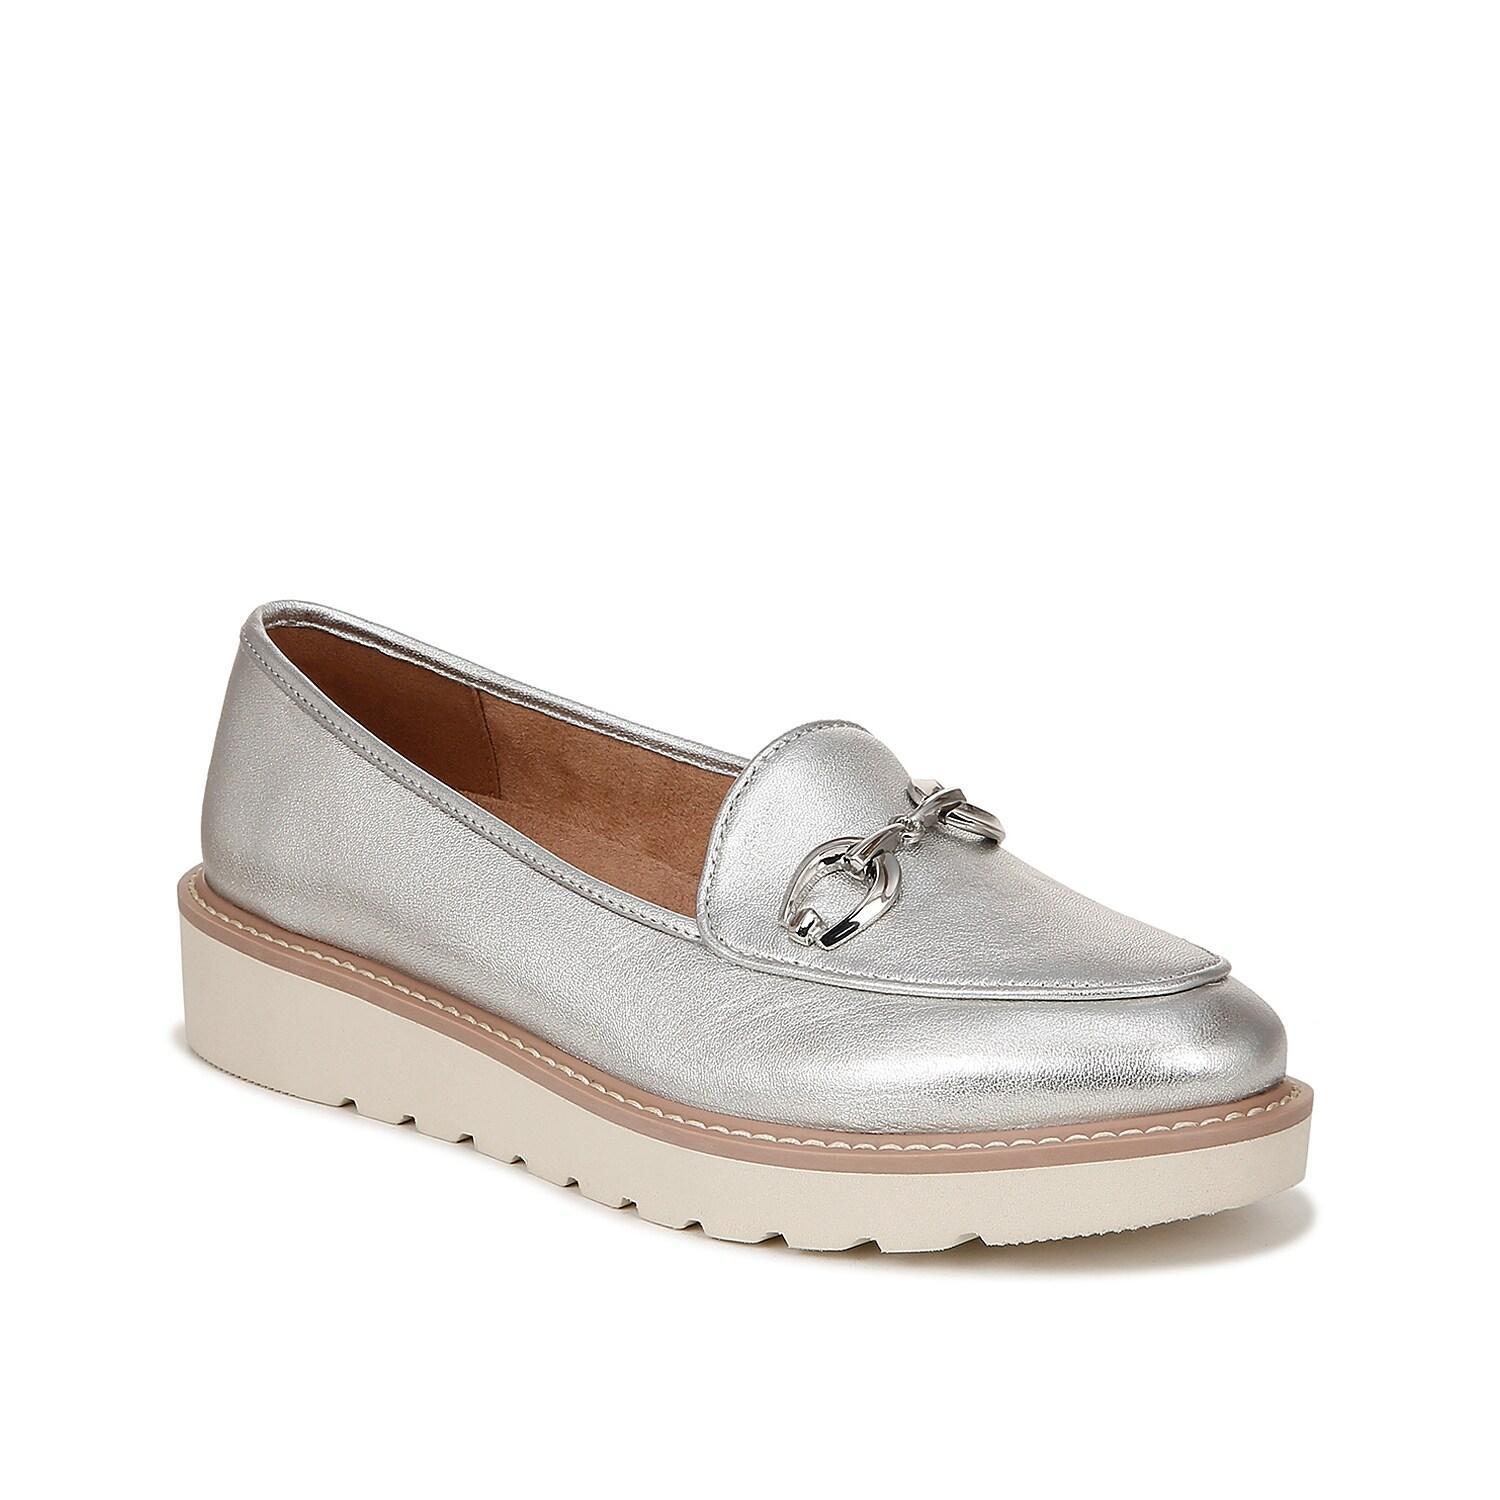 Naturalizer Adiline-Bit Leather Slip-On Lightweight Wedge Loafers Product Image